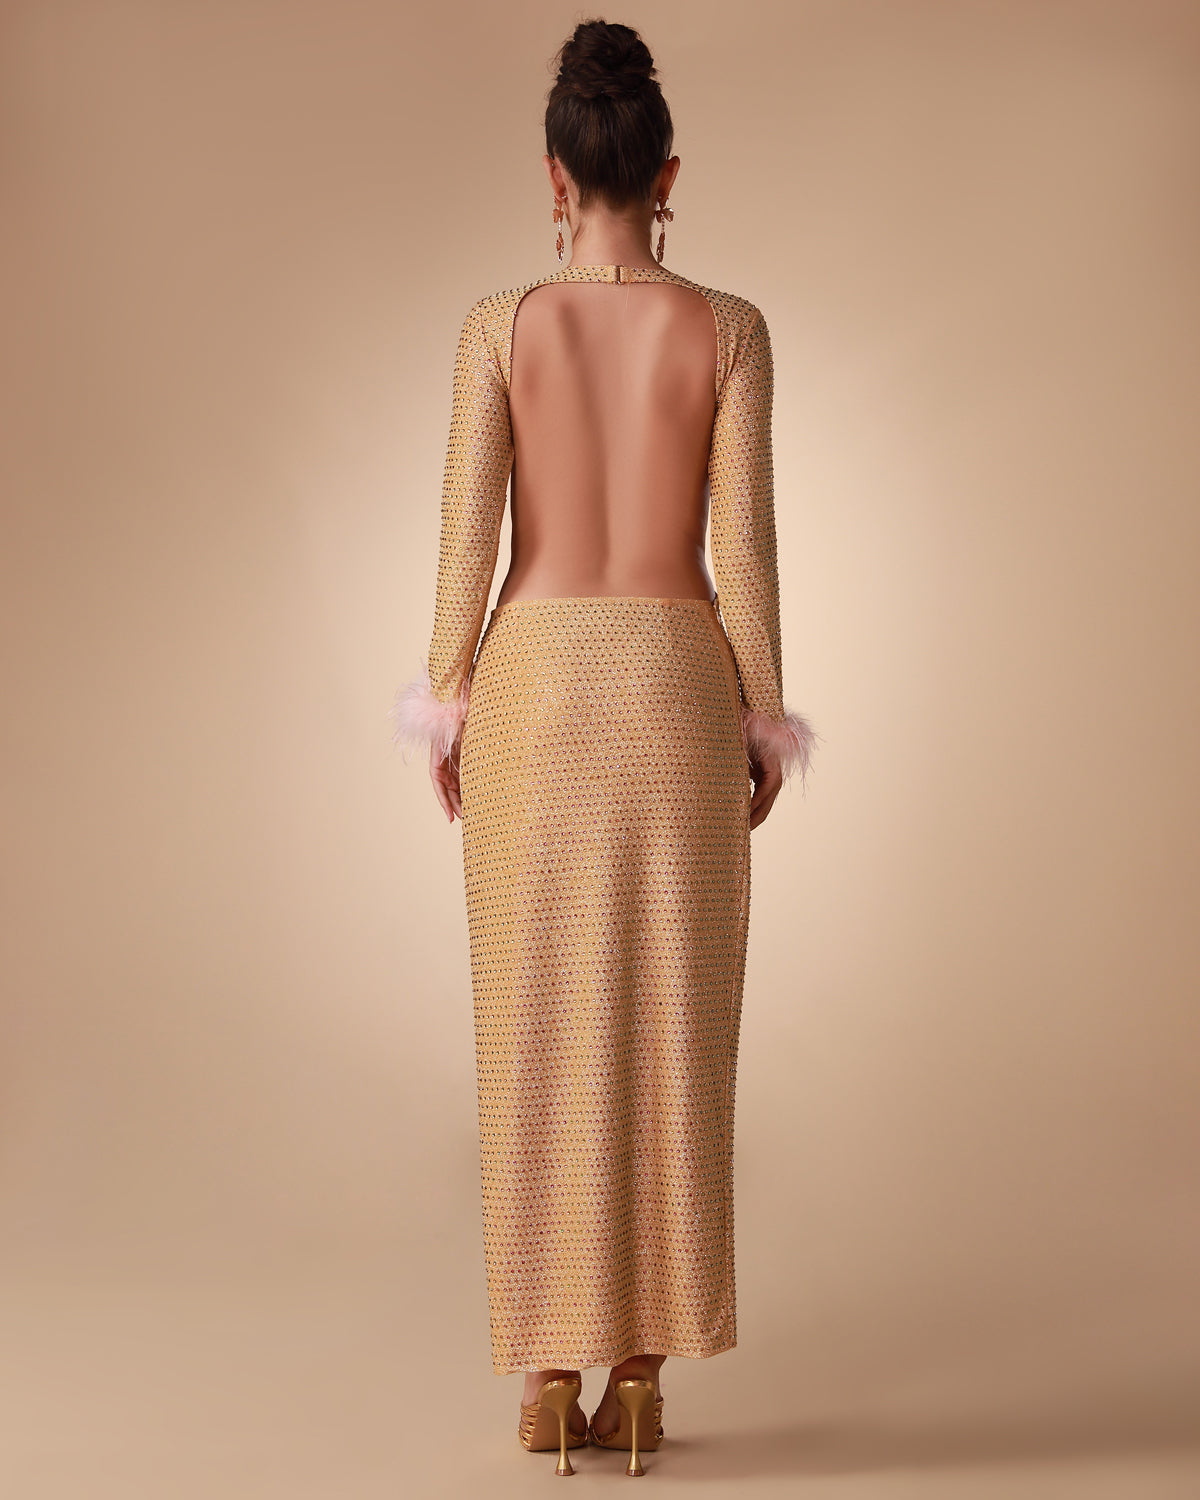 Backless Crystallized Maxi Dress